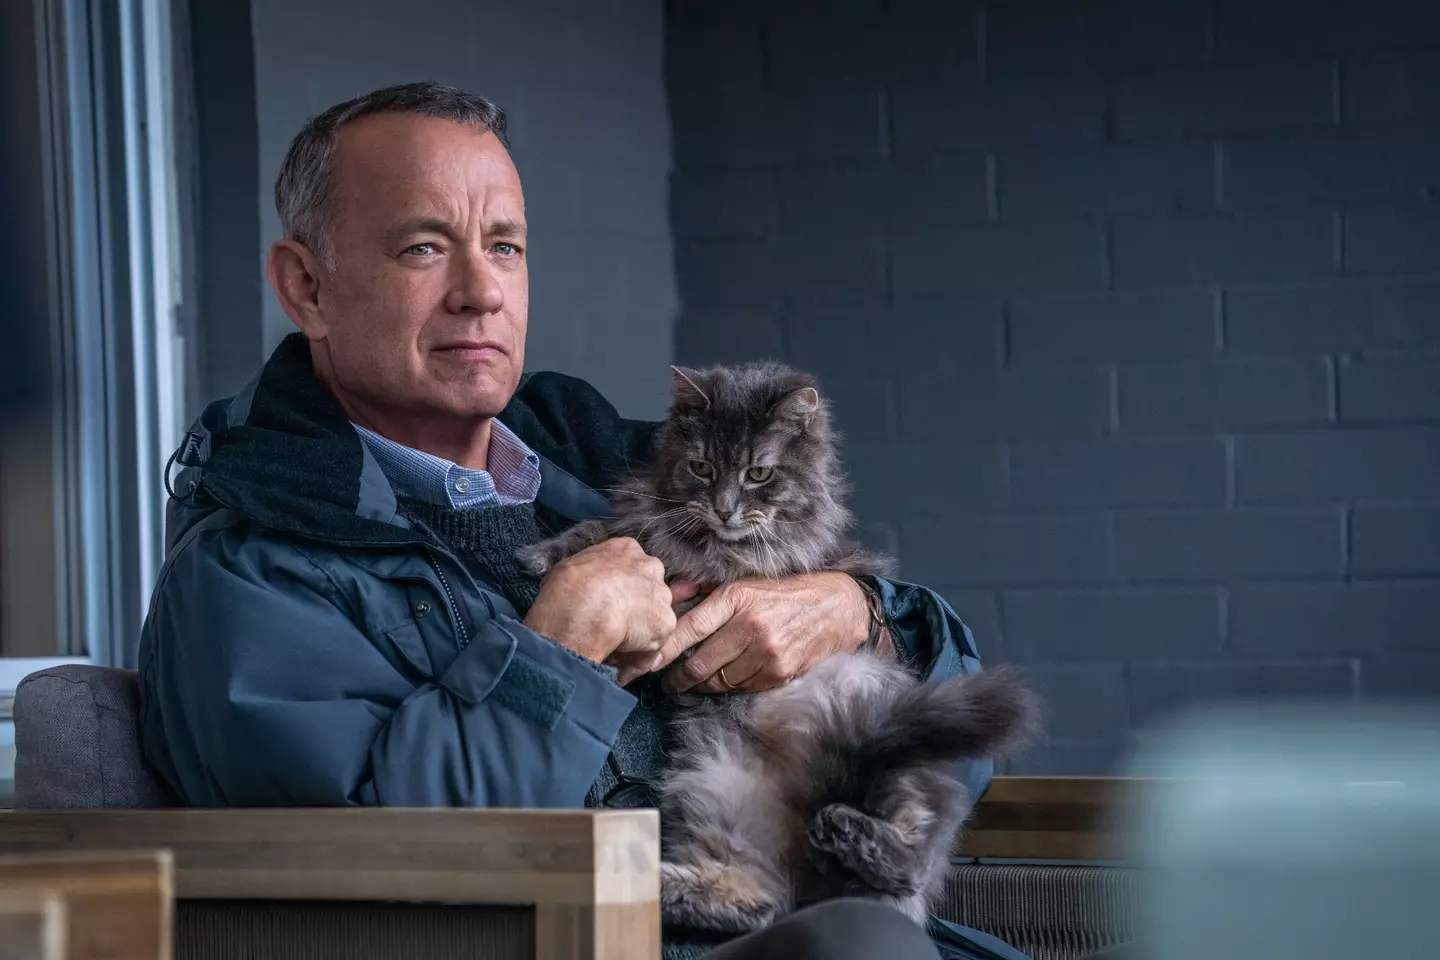 Tom Hanks and a cat, who we have decided is named Reginald because the pic credit didn't have his name.